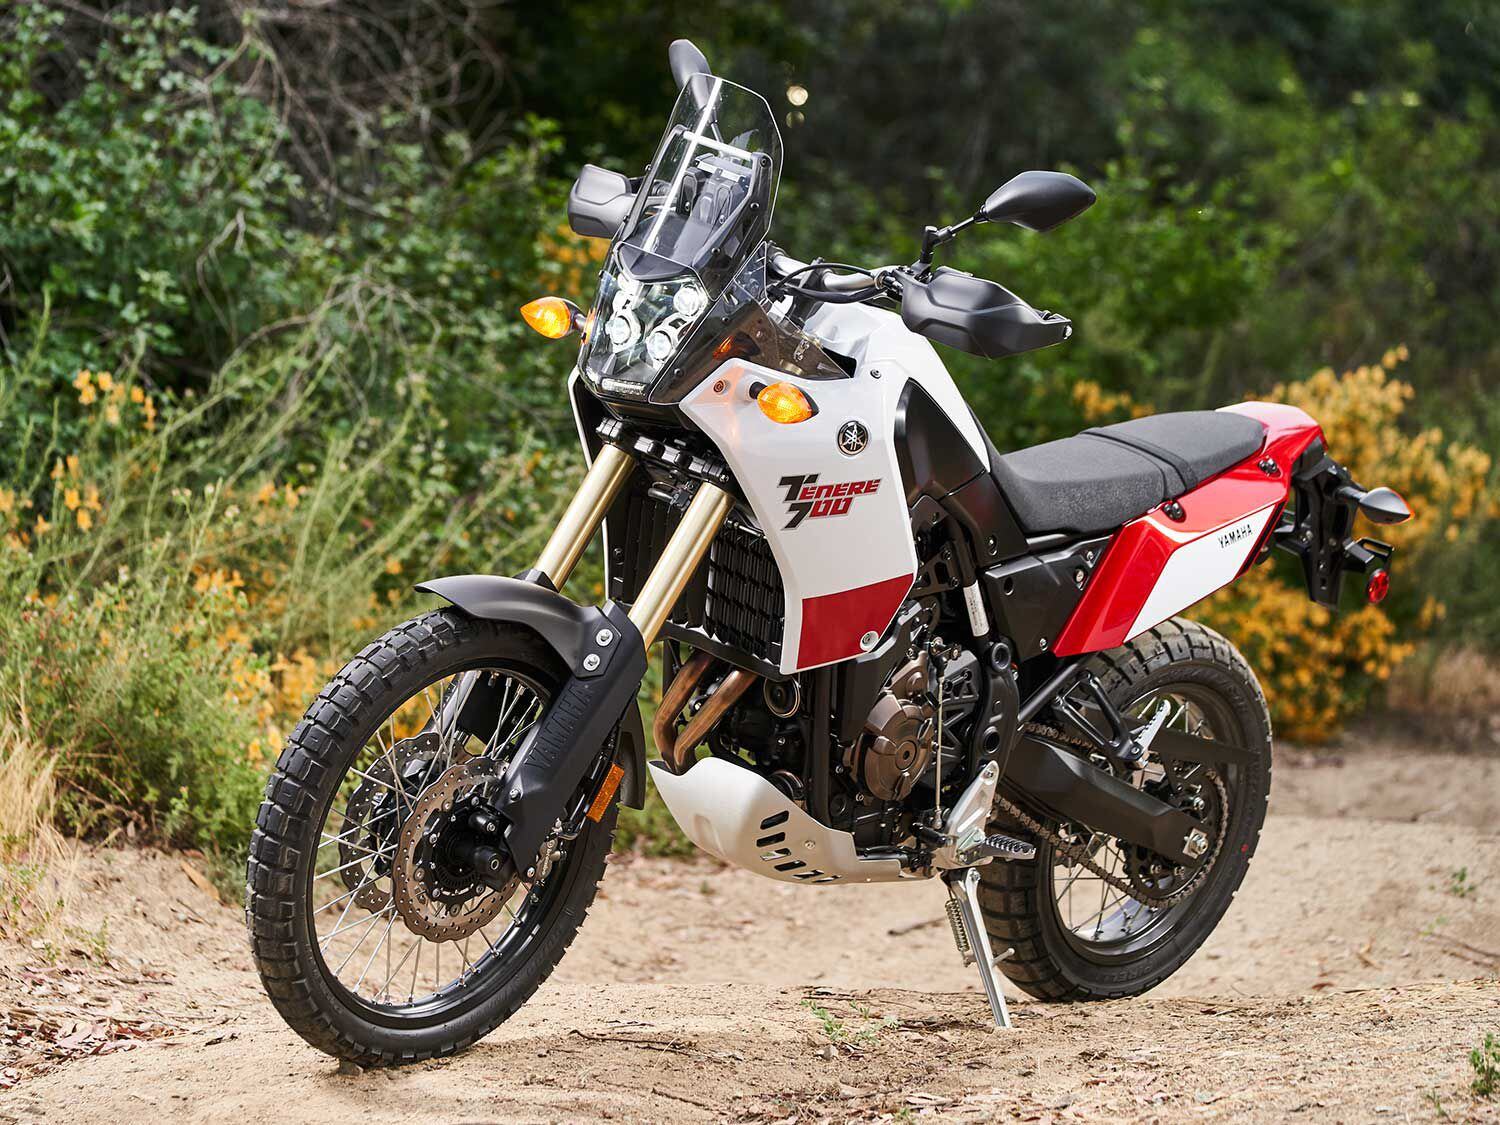 Yamaha offers exceptional value in the middleweight adventure class with its $9,999 Ténéré 700.